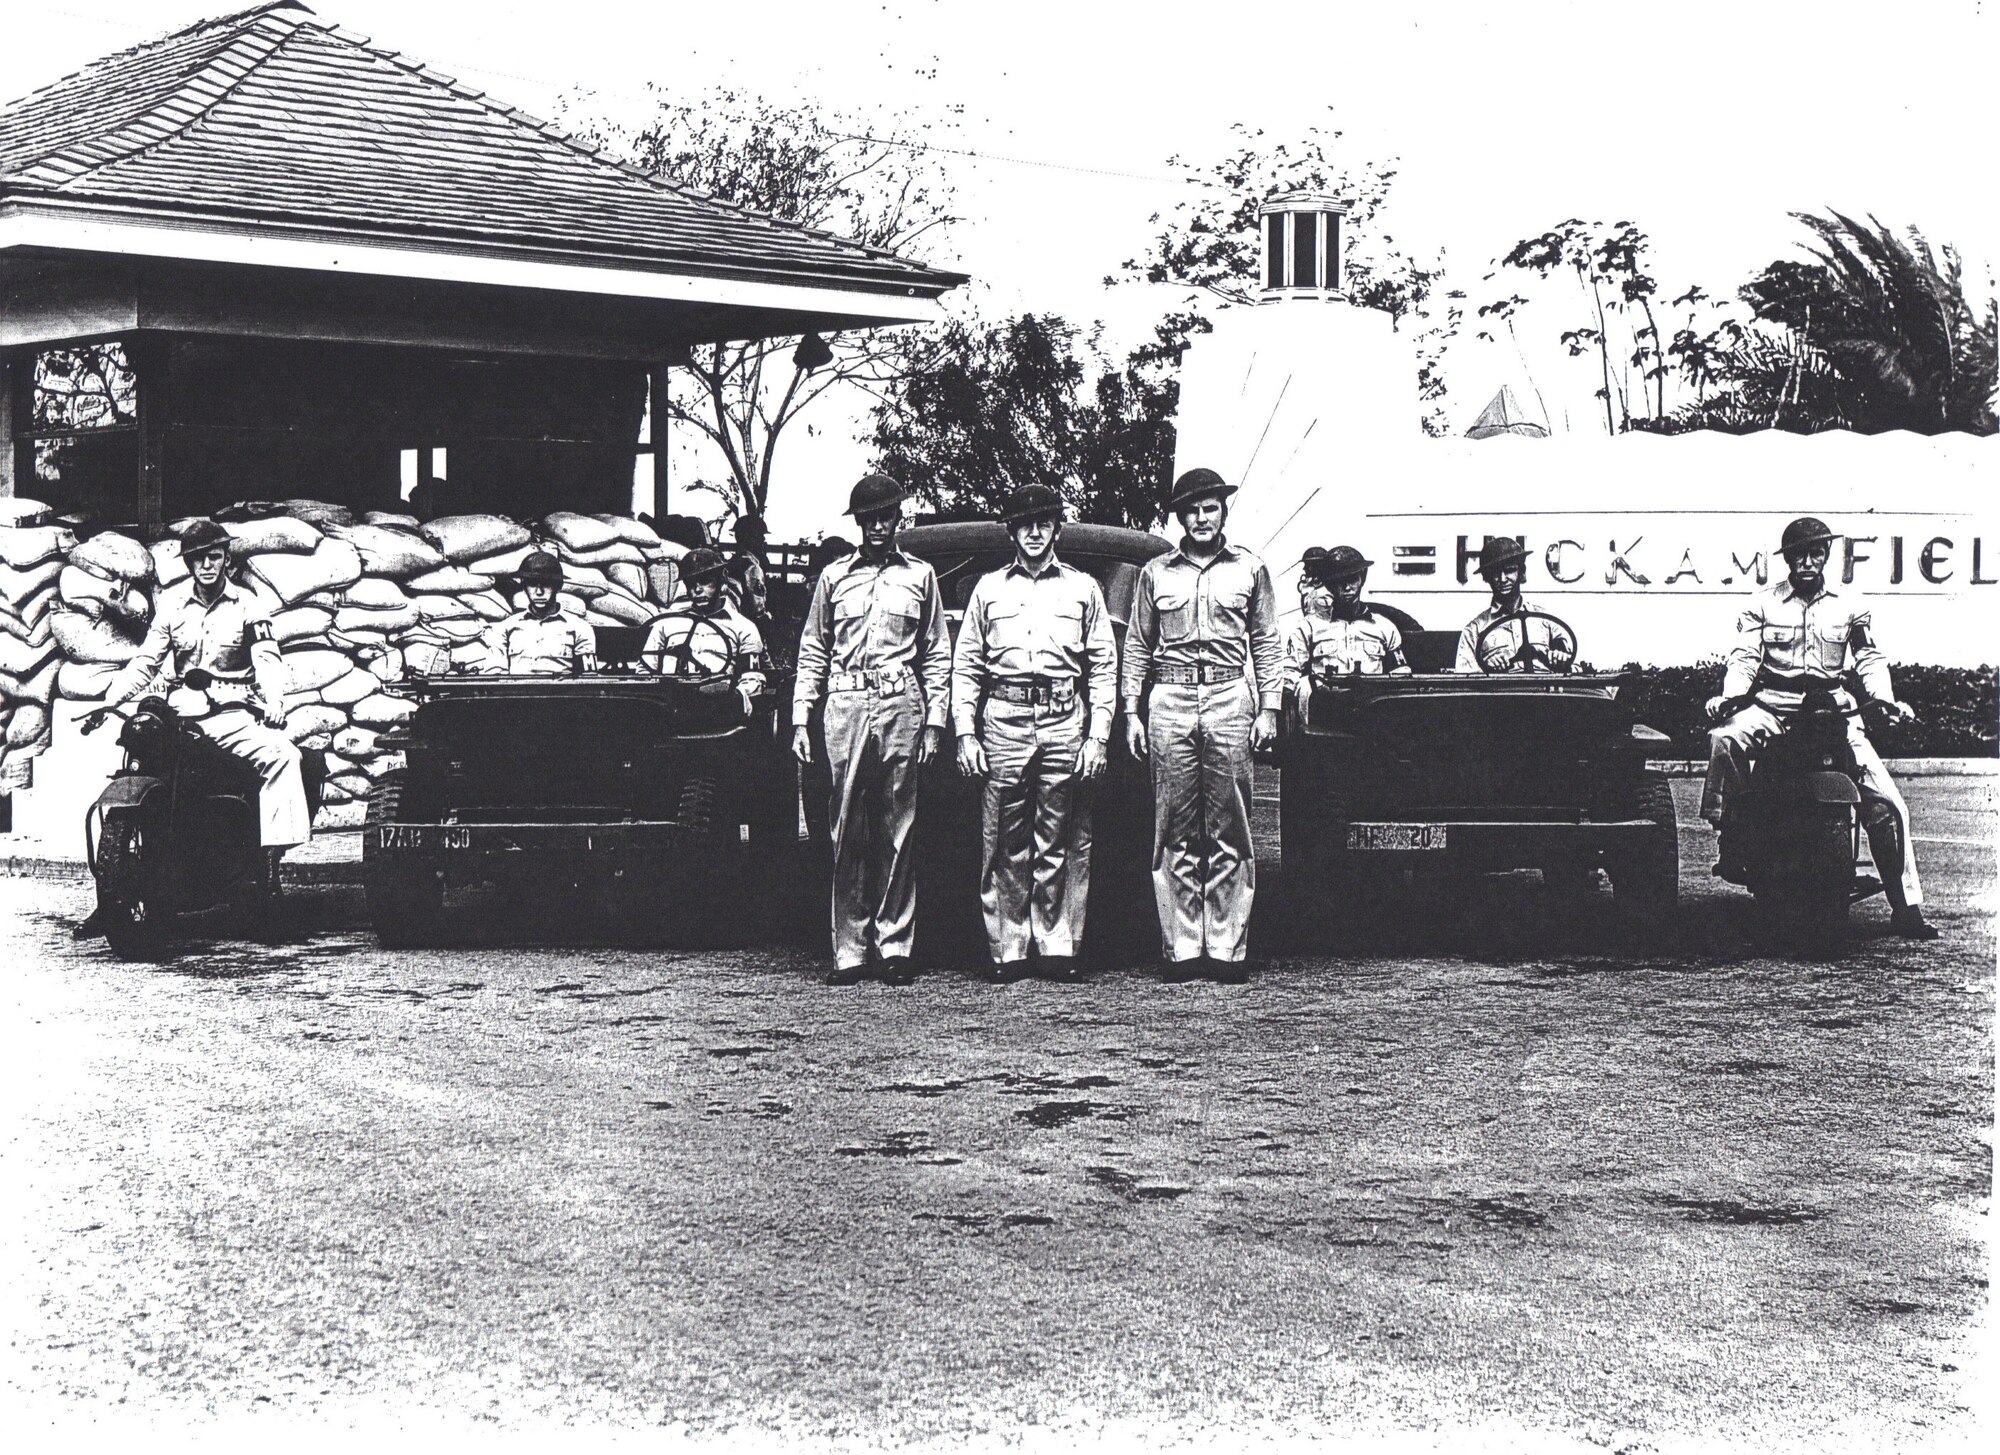 Durward Swanson, sitting on the far left motorcycle, poses with his patrol team at the front  gate of Hickam Field in this early 1942 post-attack photo. Swanson was a staff sergeant in the Army Air Corps when the Japanese executed their surprise attack of the military installations on the Hawaiian island of Oahu. Swanson went on to the Battle of Midway in June 1942 as a crew chief, where his B-17 was shot down, leaving him with injuries to his leg, side and face. (Courtesy photo) 